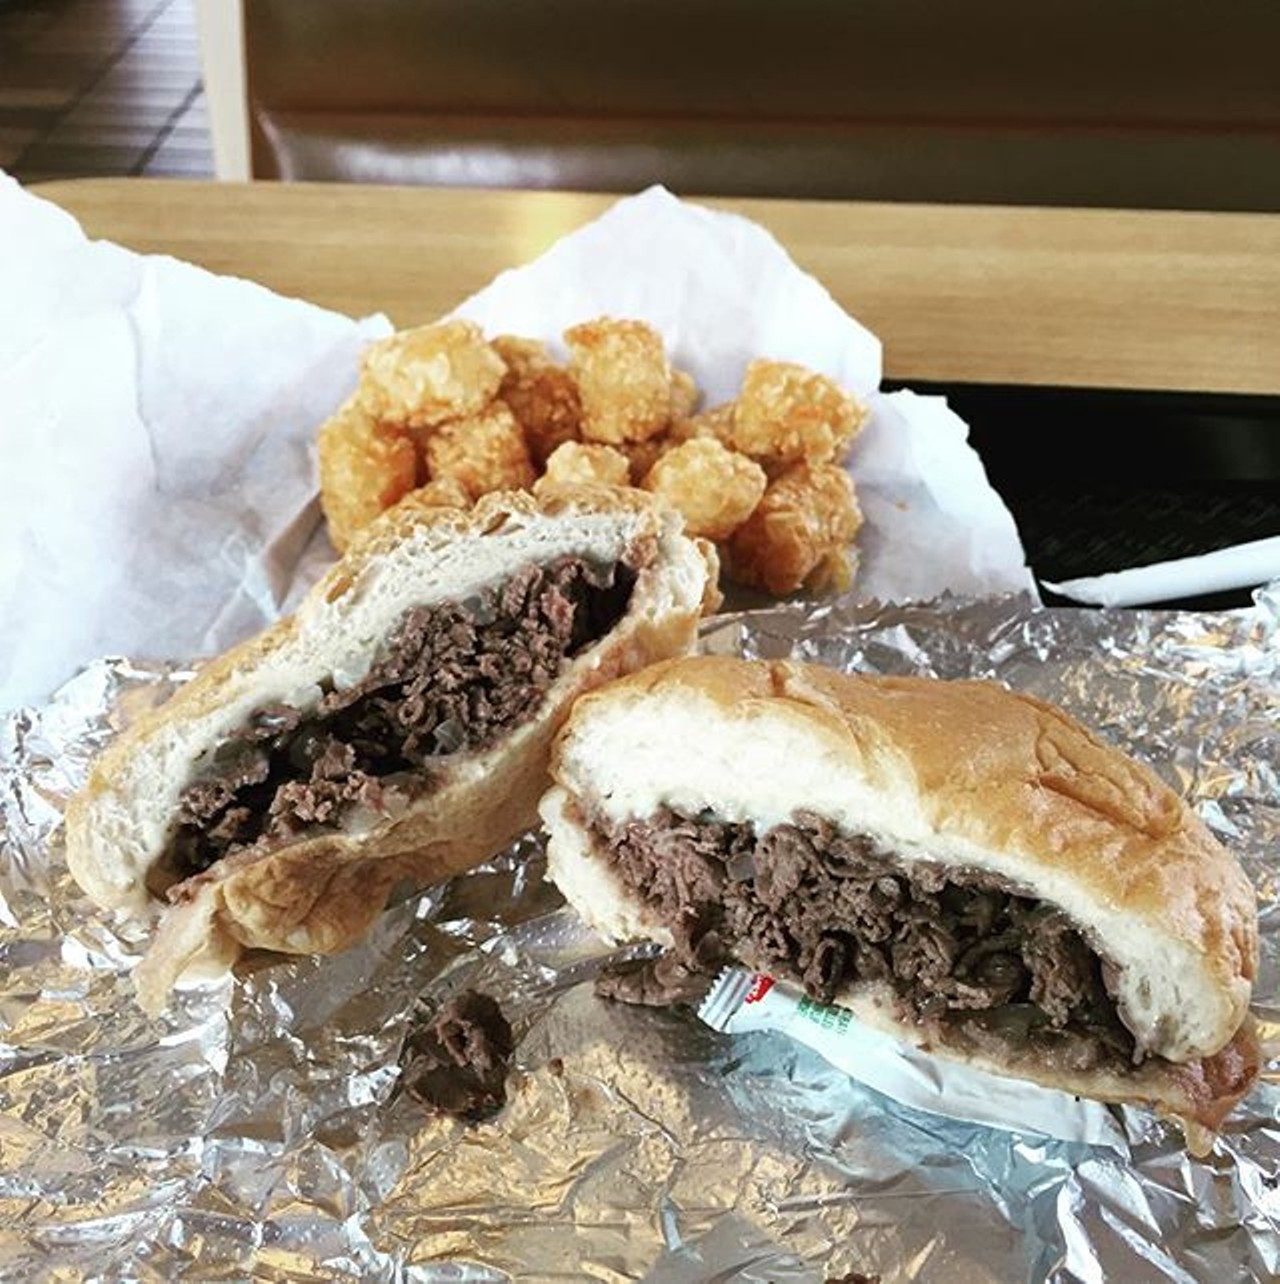 Beefy King
424 N. Bumby Ave., 407-894-2241
Beefy King has been serving sandwiches for about 40 years so no matter which you order, it&#146;s bound to be better than good. Beefy King has mastered roast beef sandwiches, beefy spuds (tater tots) and vanilla milkshakes.
Photo via pigskinpursuit/Instagram